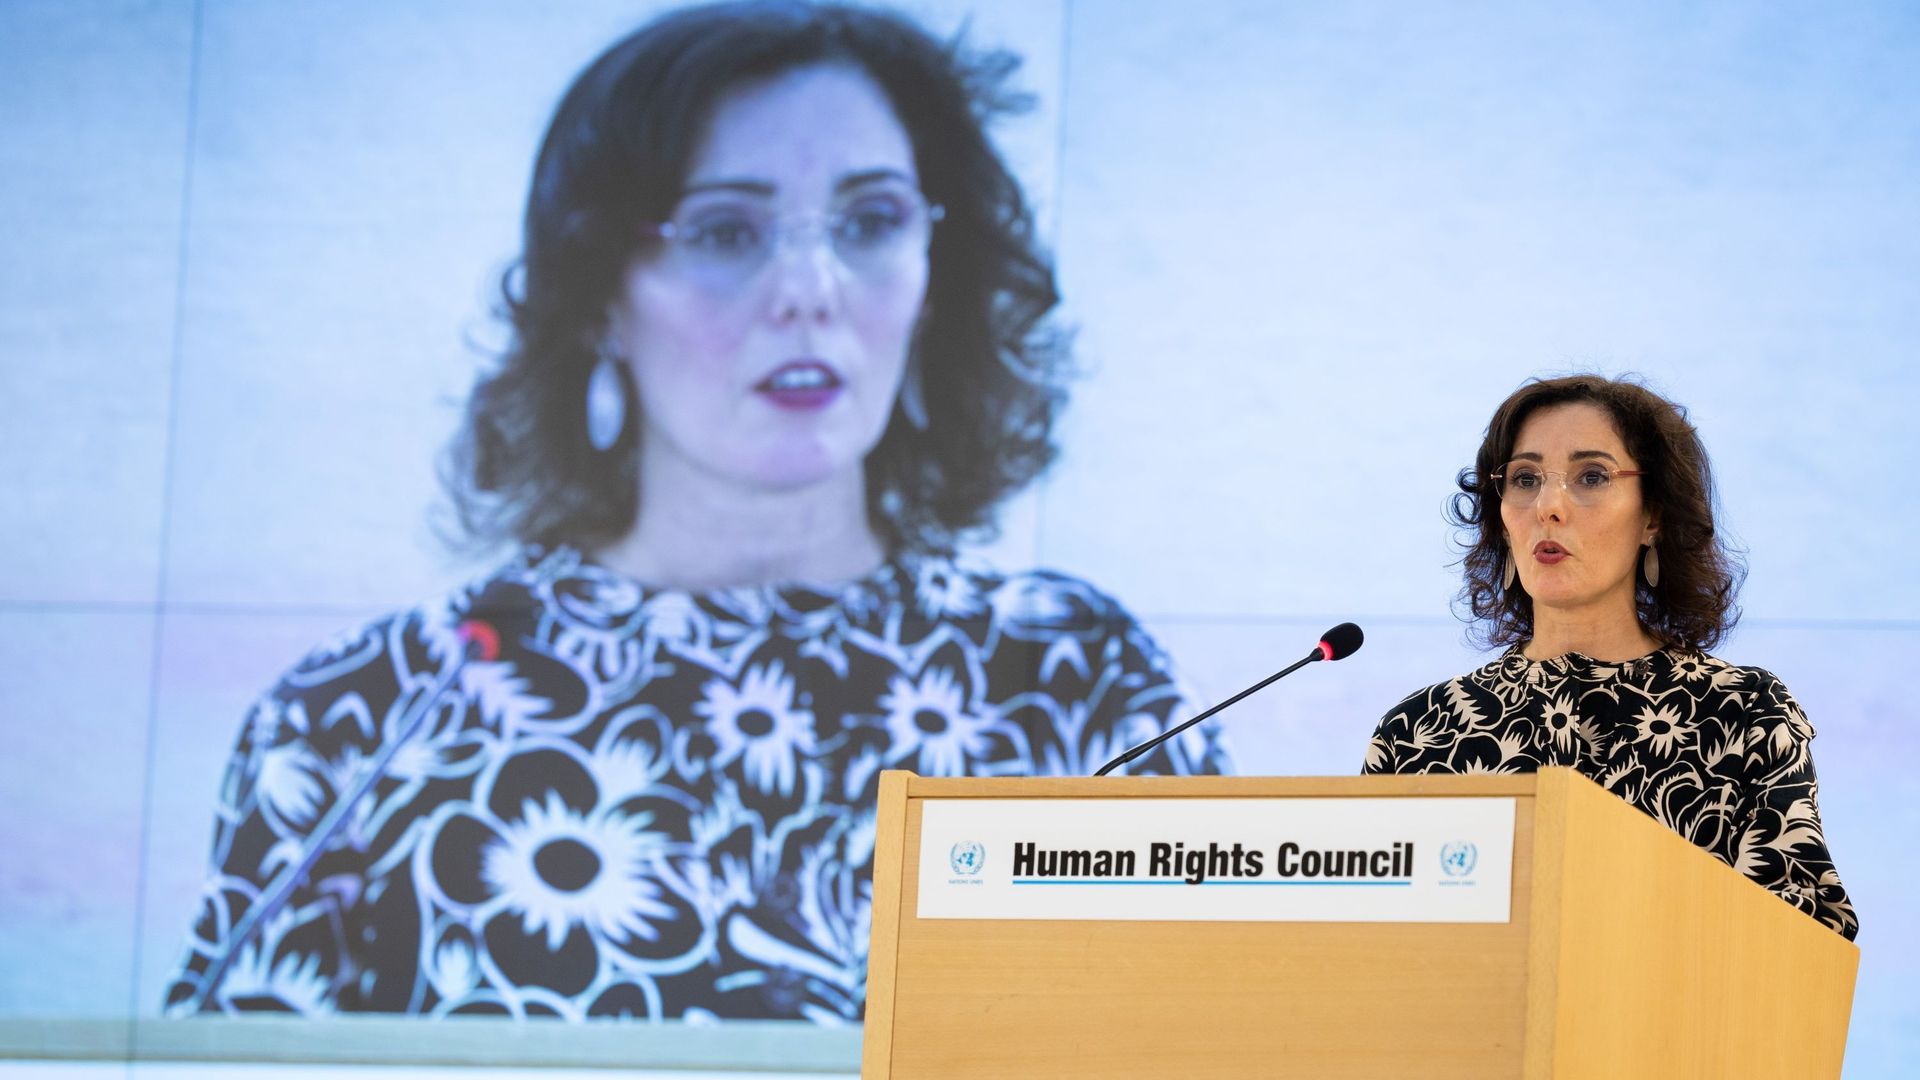 Foreign Minister Hadja Lahbib delivers a speech during the opening session of the 52nd session of the United Nations Human Rights Council, in Geneva, Switzerland, Monday, February 27, 2023.